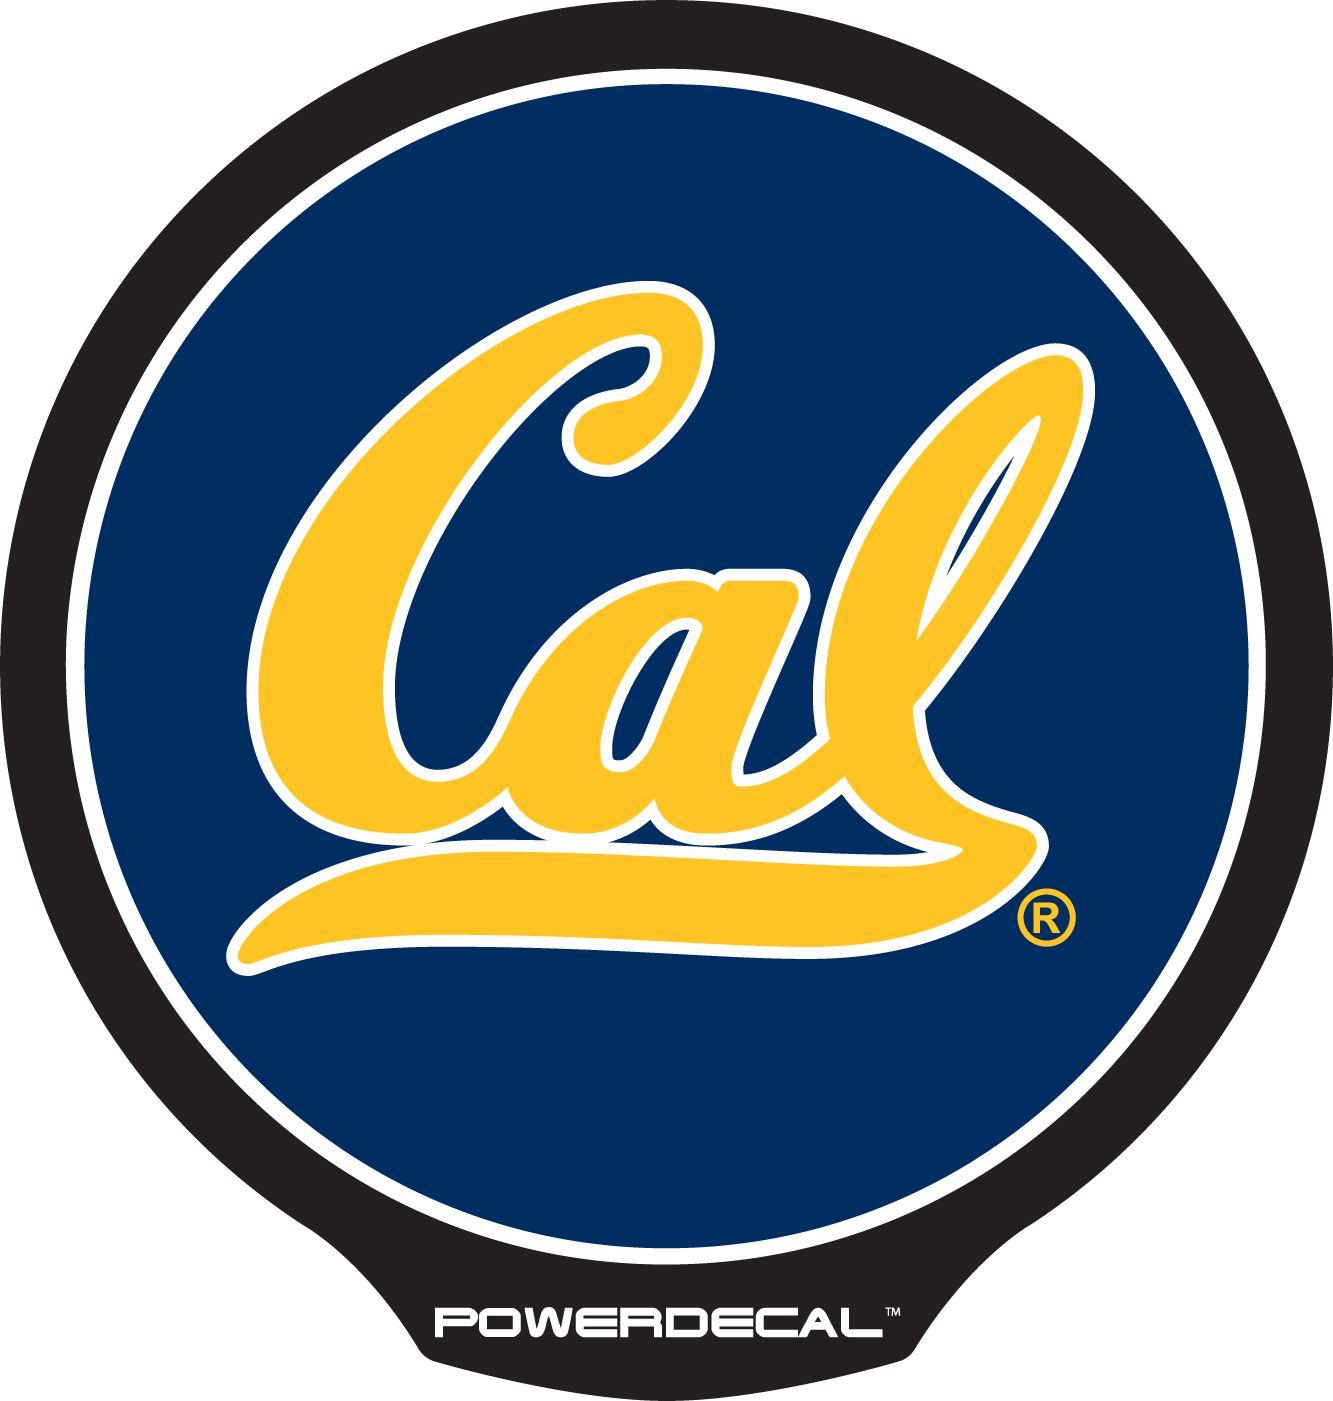 Blue and Yellow Round Logo - PowerDecal PWR290601 Decal College University Of California Logo ...